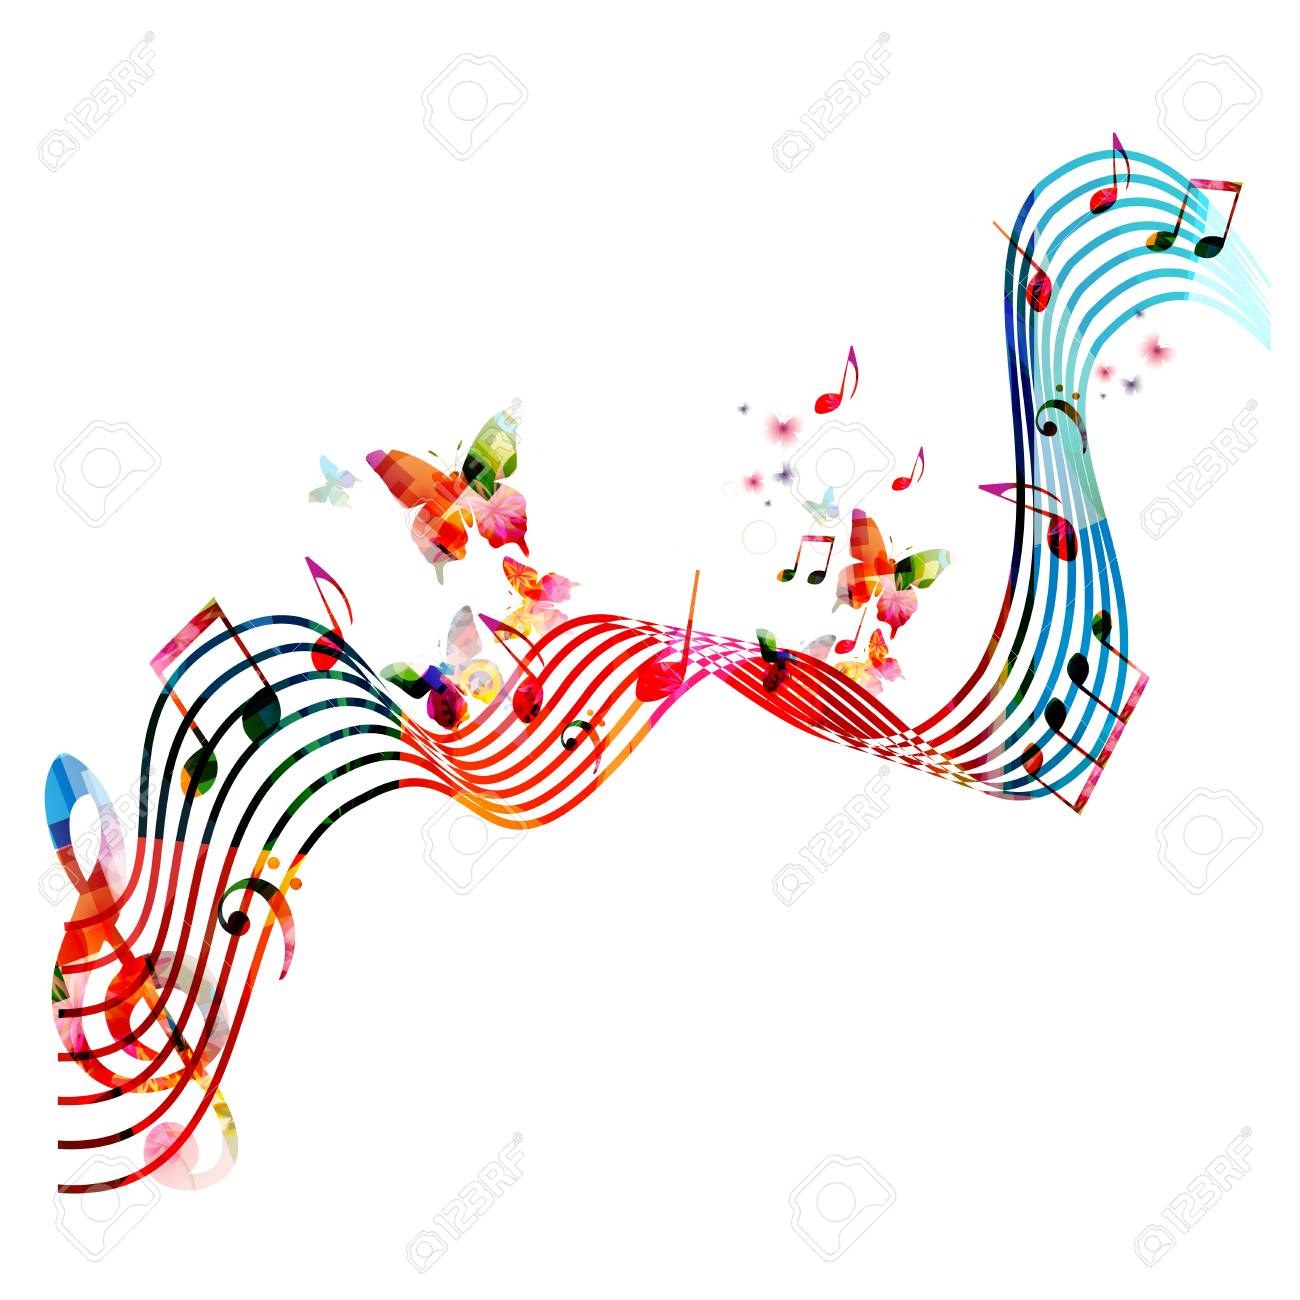 73504603-colorful-stave-with-music-notes-and-butterflies-isolated-vector-illustration-music-background-for-po.jpg
 (Intense)